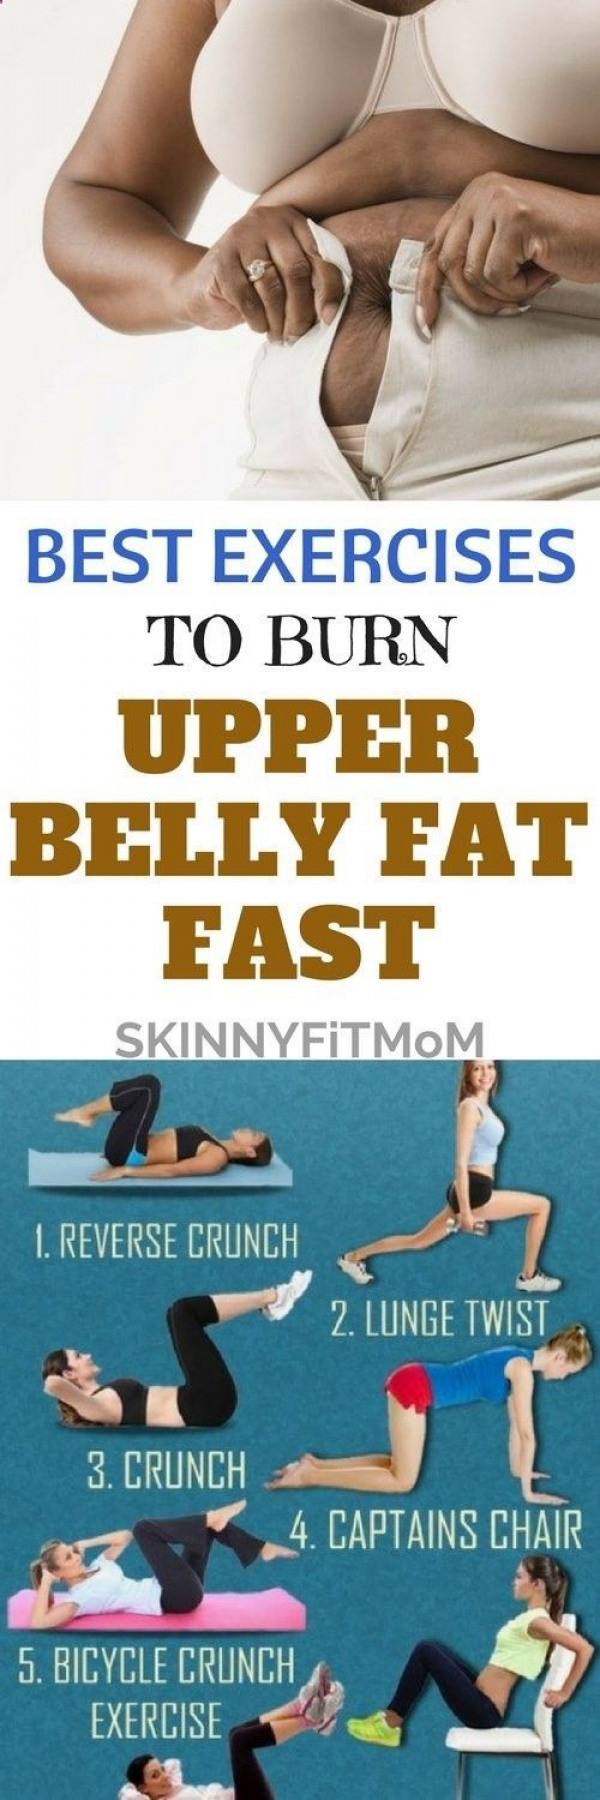 2 Week Burn Belly Fat
 Best Exercises To Burn Upper Belly Fat Fast – Simple Ways